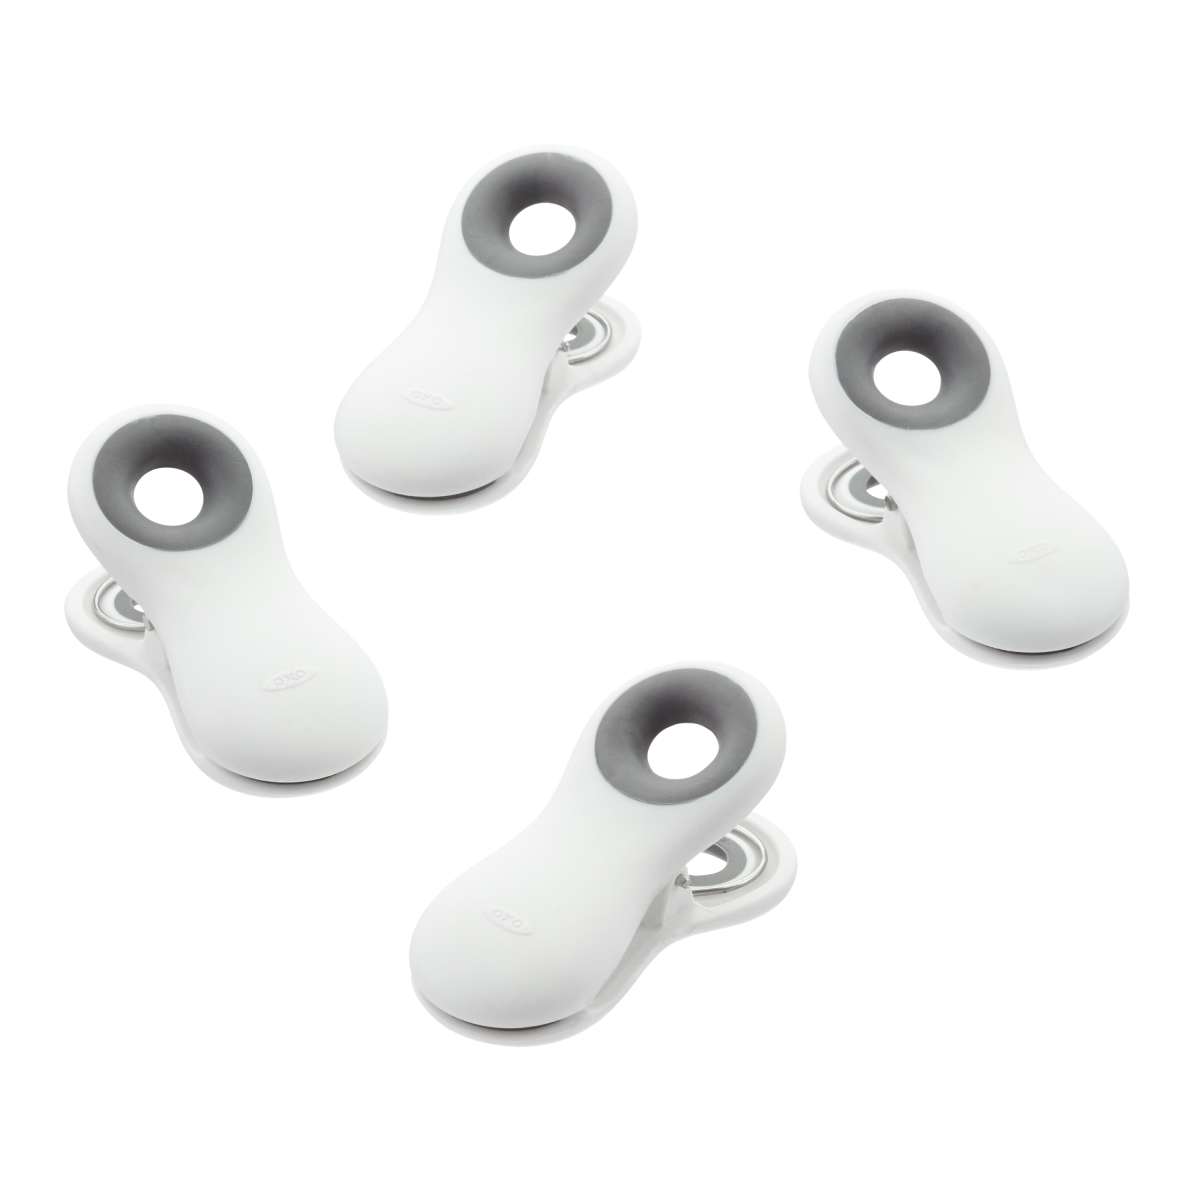 https://www.containerstore.com/catalogimages/433503/503060-good-grips-magnetic-clips-whi.jpg